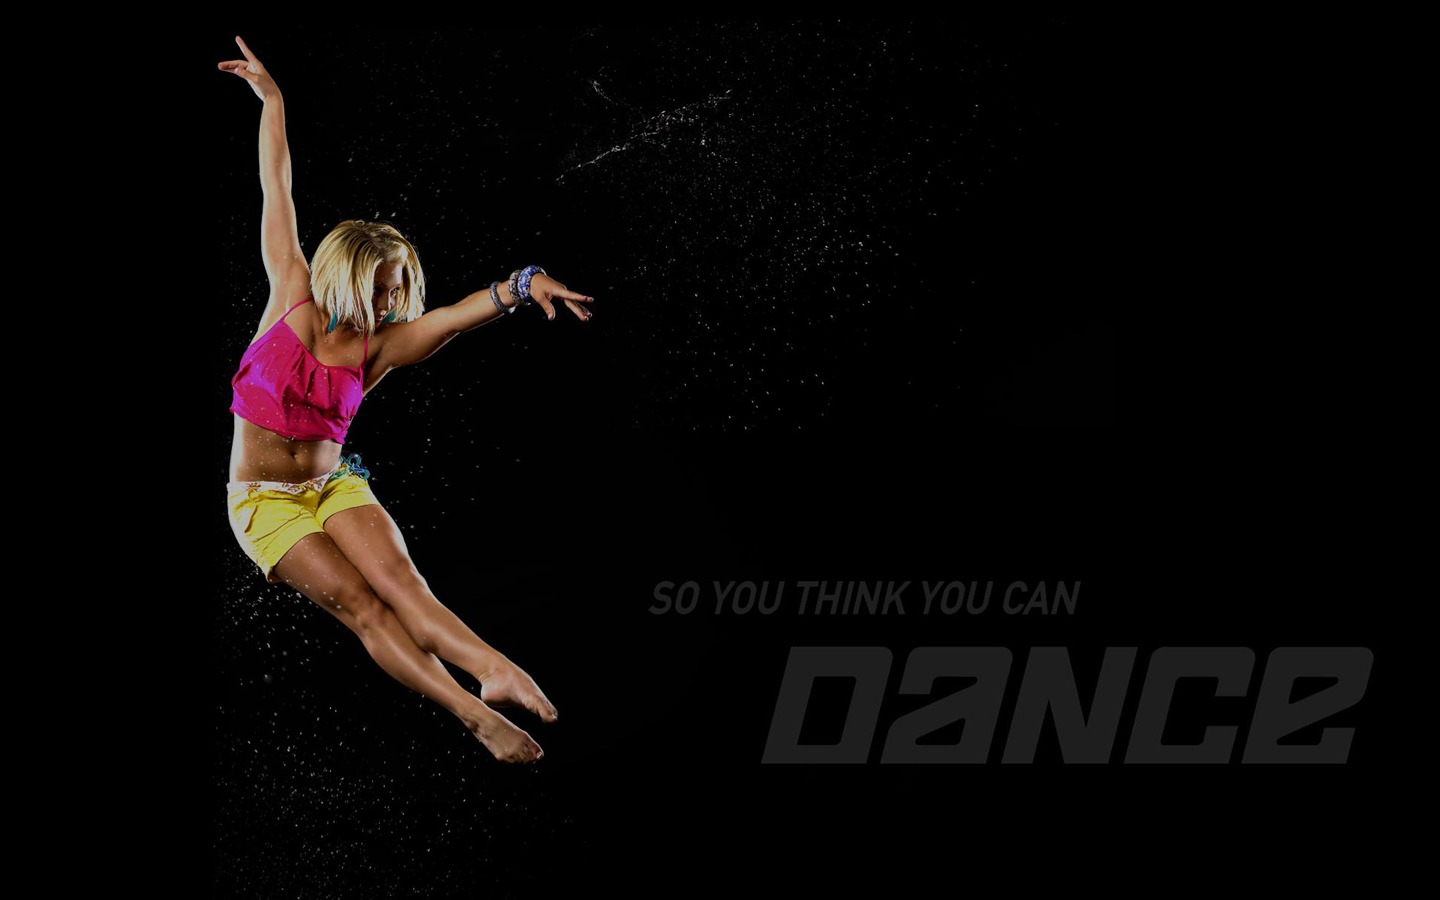 So You Think You Can Dance Wallpaper (1) #5 - 1440x900